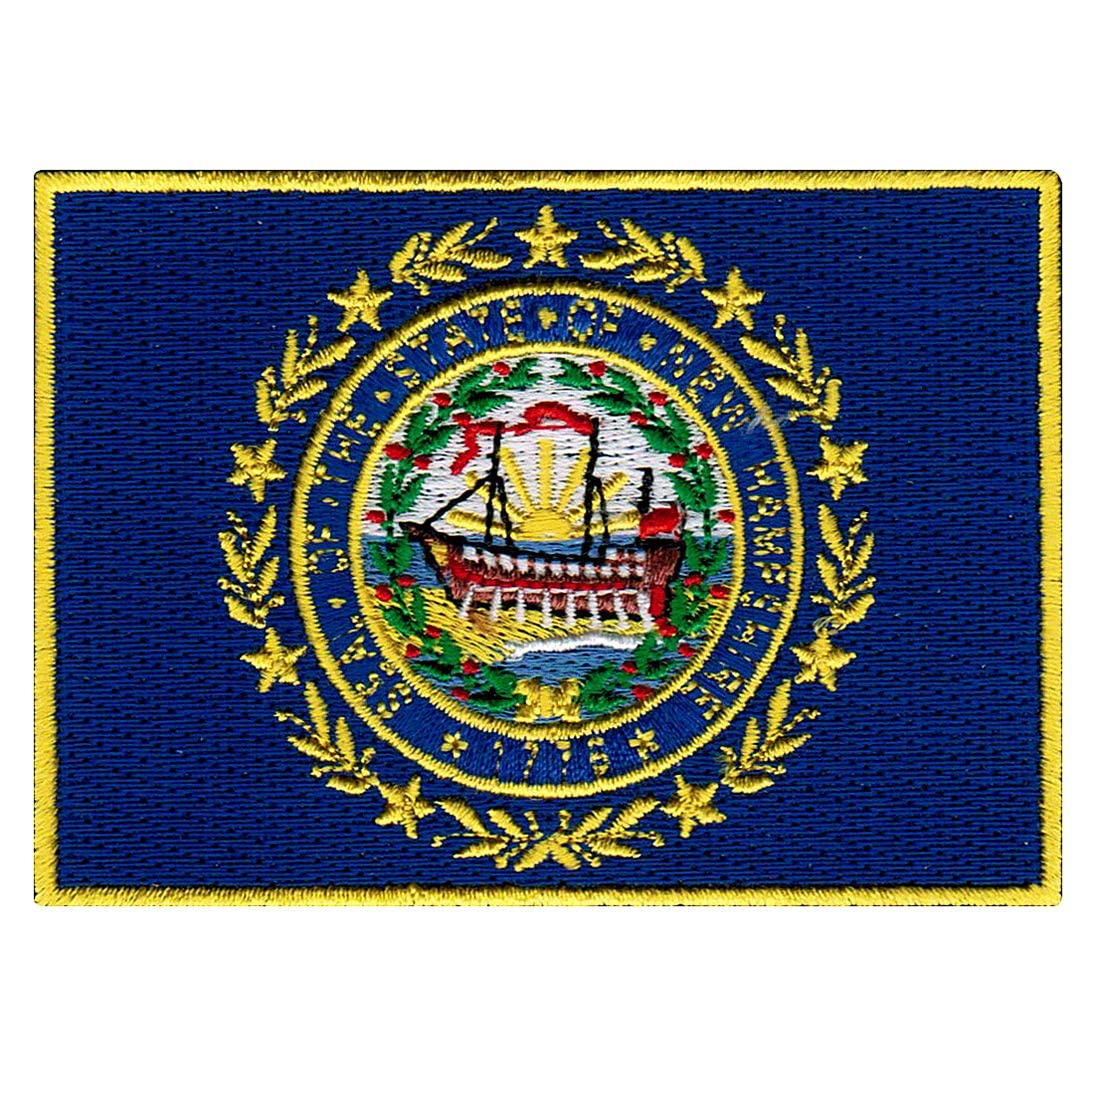 Cypress Collectibles New Hampshire State Flag Embroidered Patch Velcroa-Brand Fasteners Nh Emblem